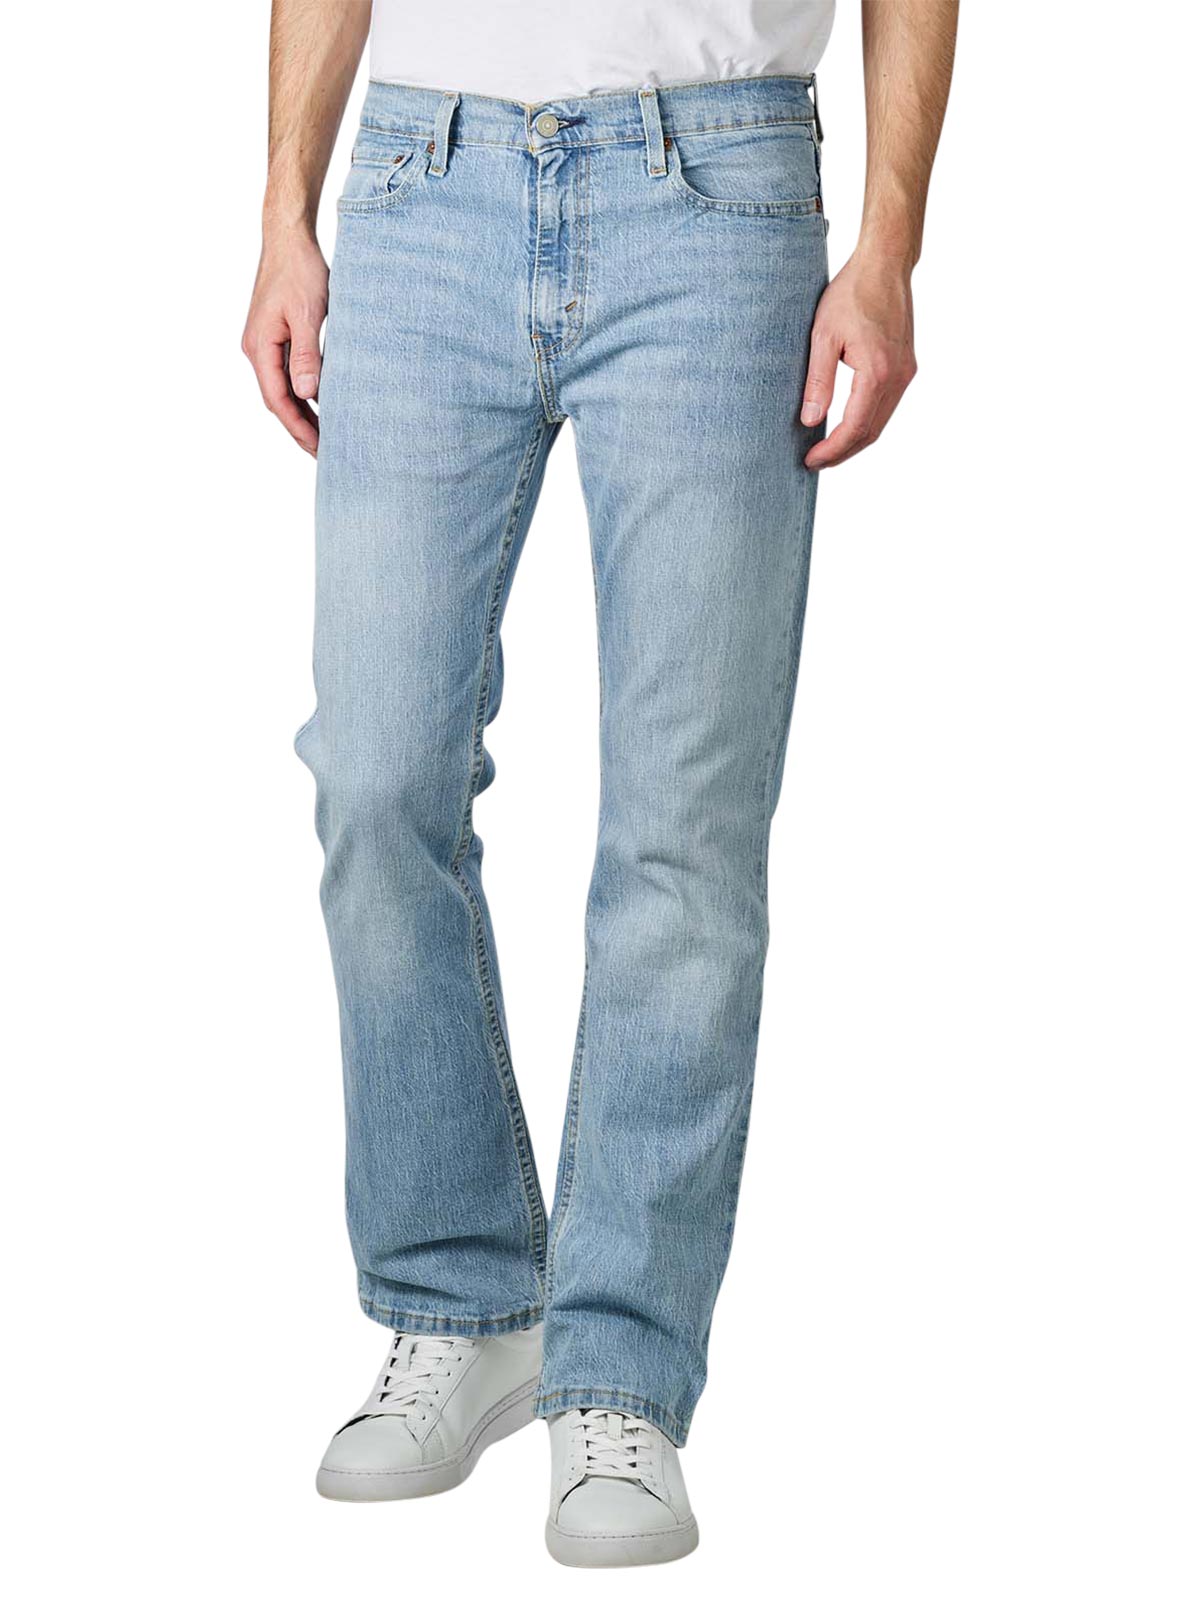 Levi's 527 Jeans Bootcut Fit Here We Stop Levi's Men's Jeans | Free  Shipping on  - SIMPLY LOOK GOOD